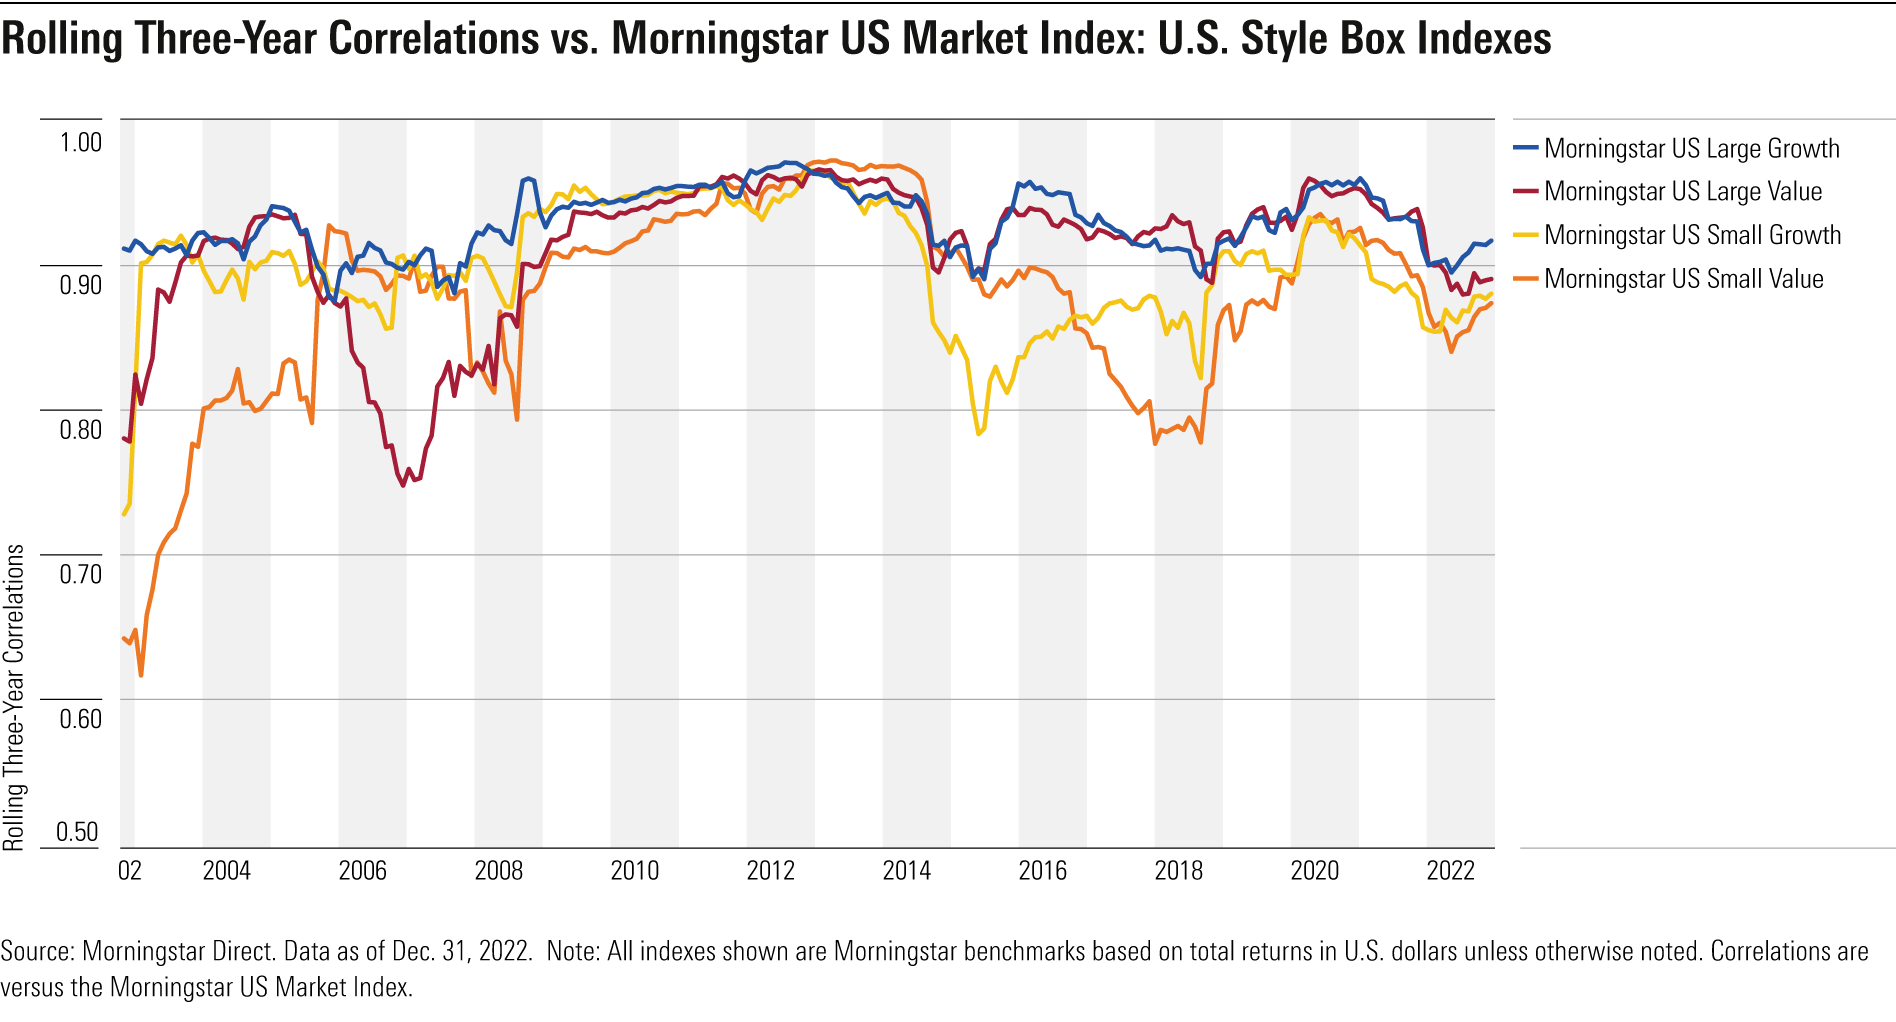 A line graph showing rolling three-year correlations for four Morningstar Style Box indexes from 2000 through 2022.